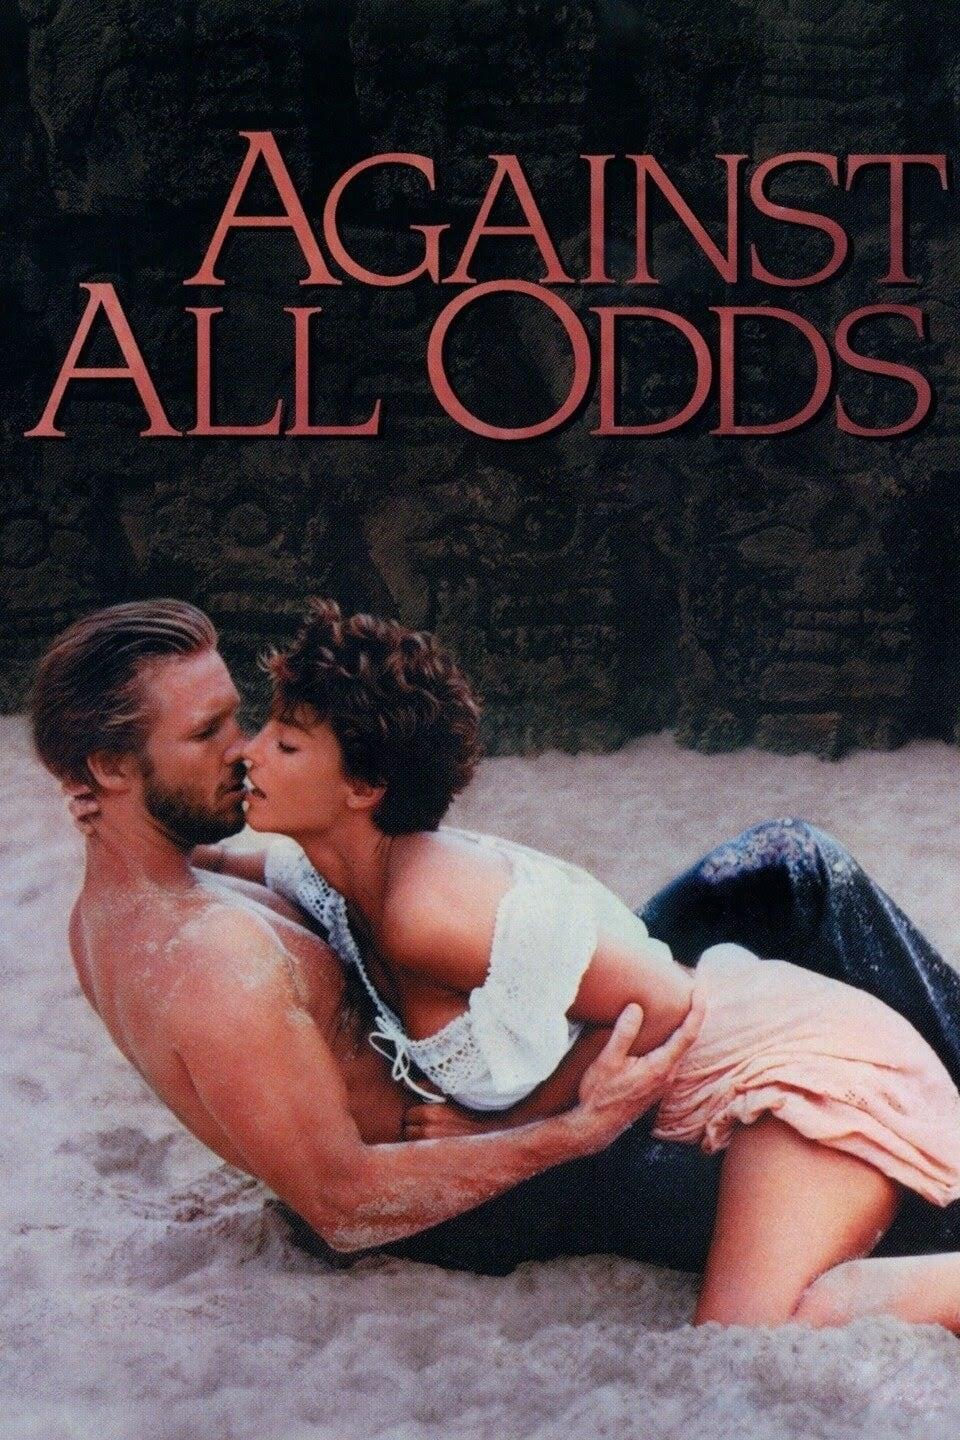 Against All Odds poster